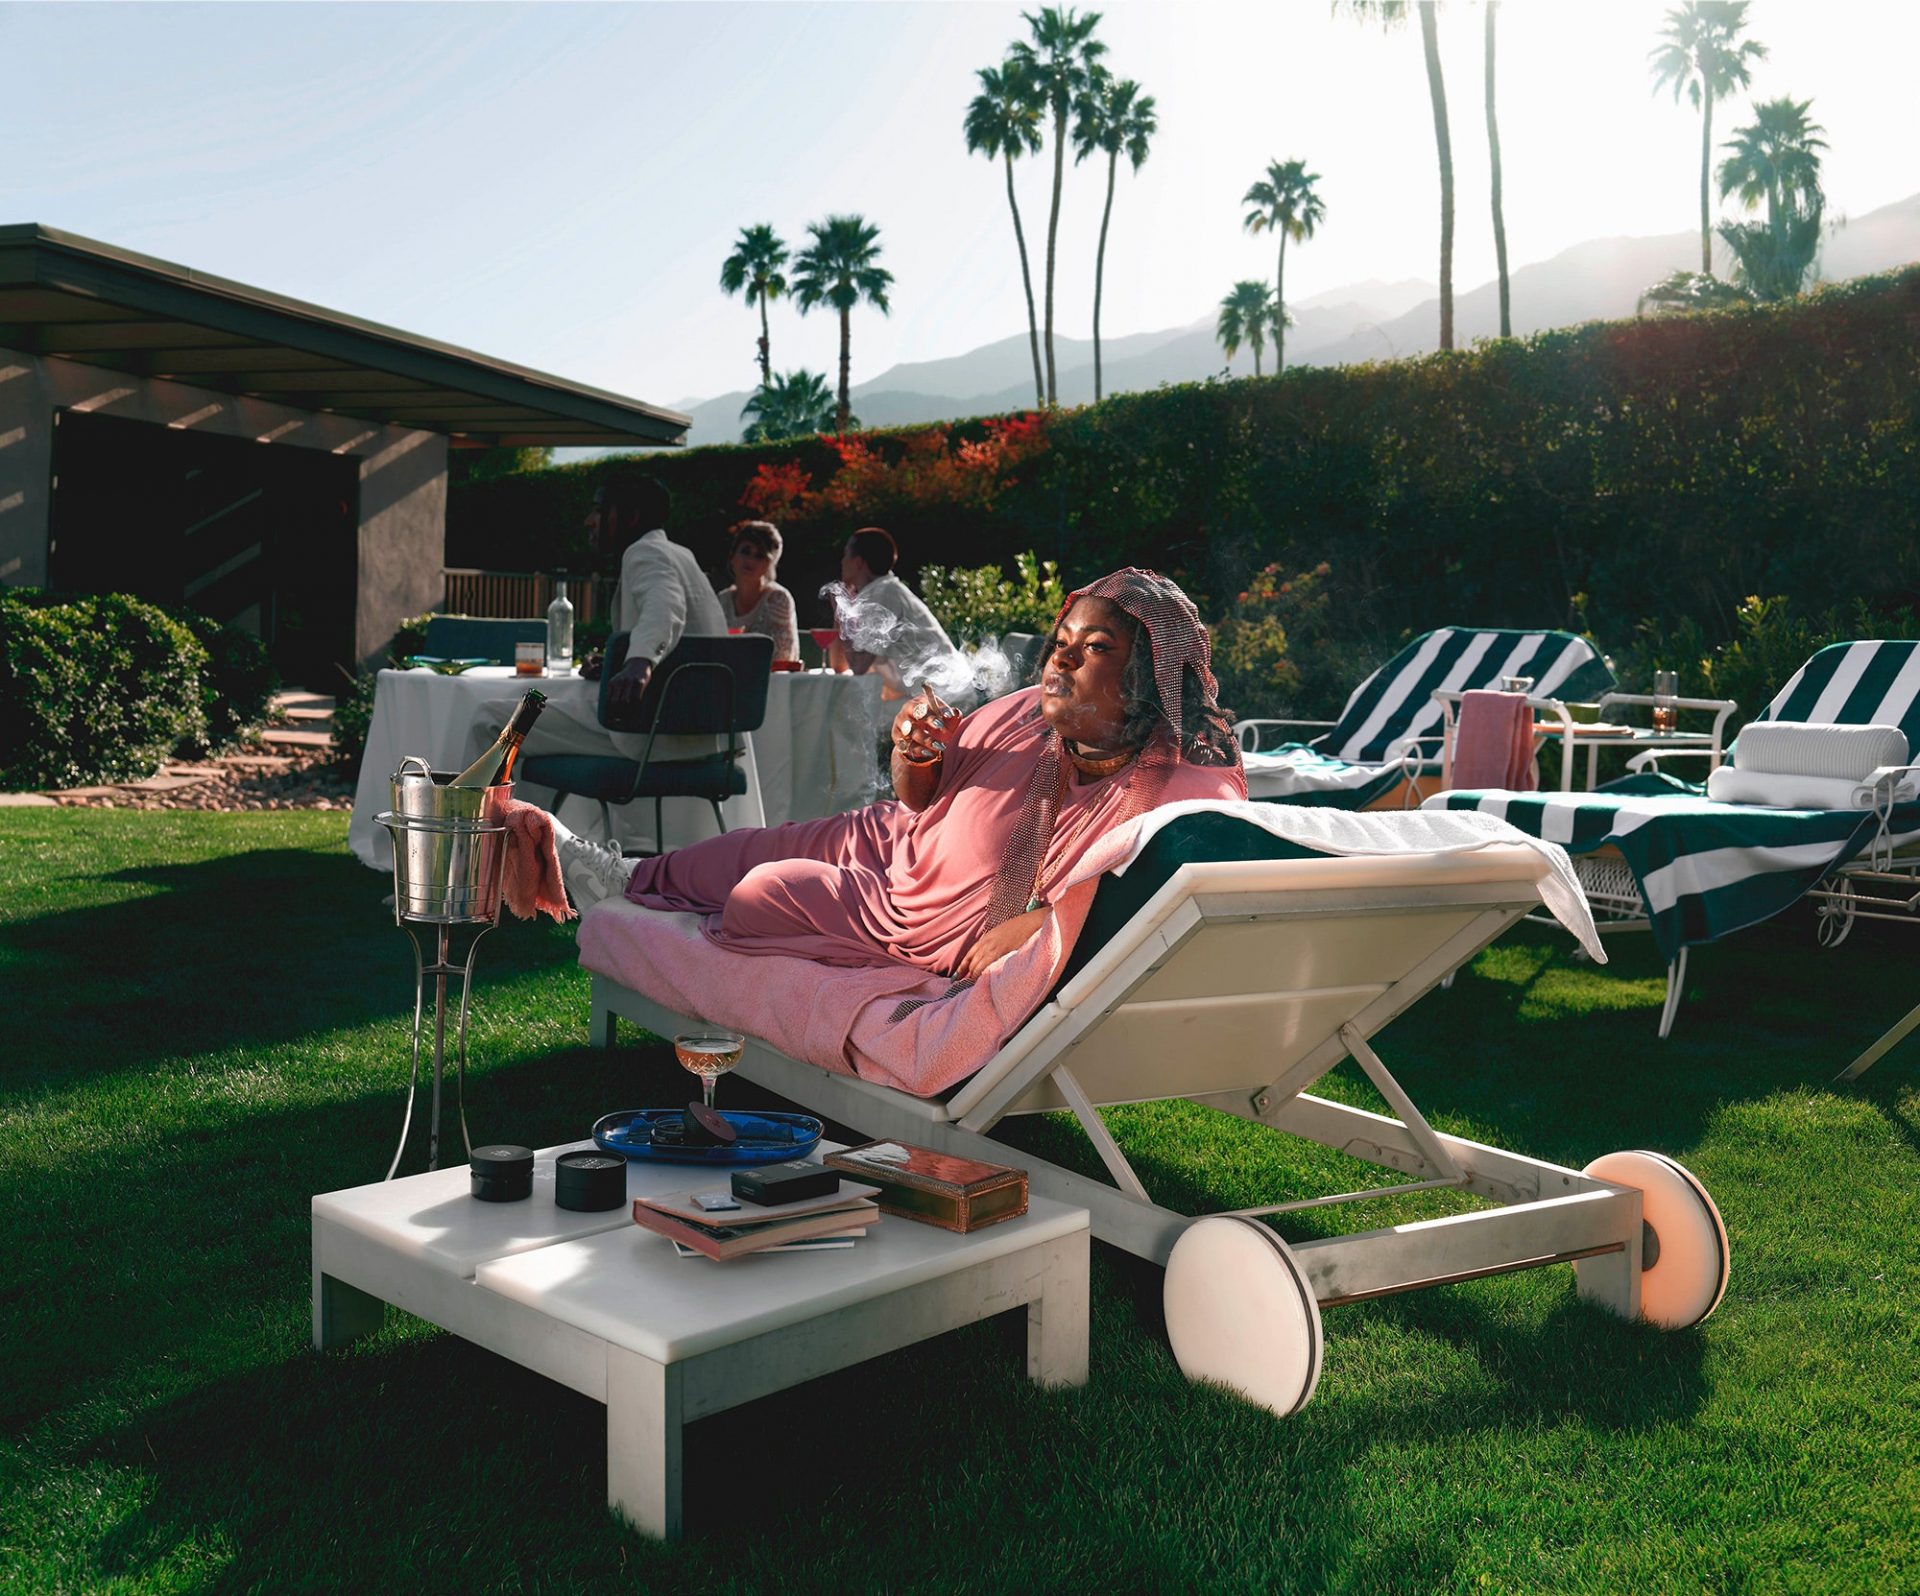 Hype Williams’s Reimagines Slim Aarons’ Poolside Socialites for Jay-Z’s Cannabis Line